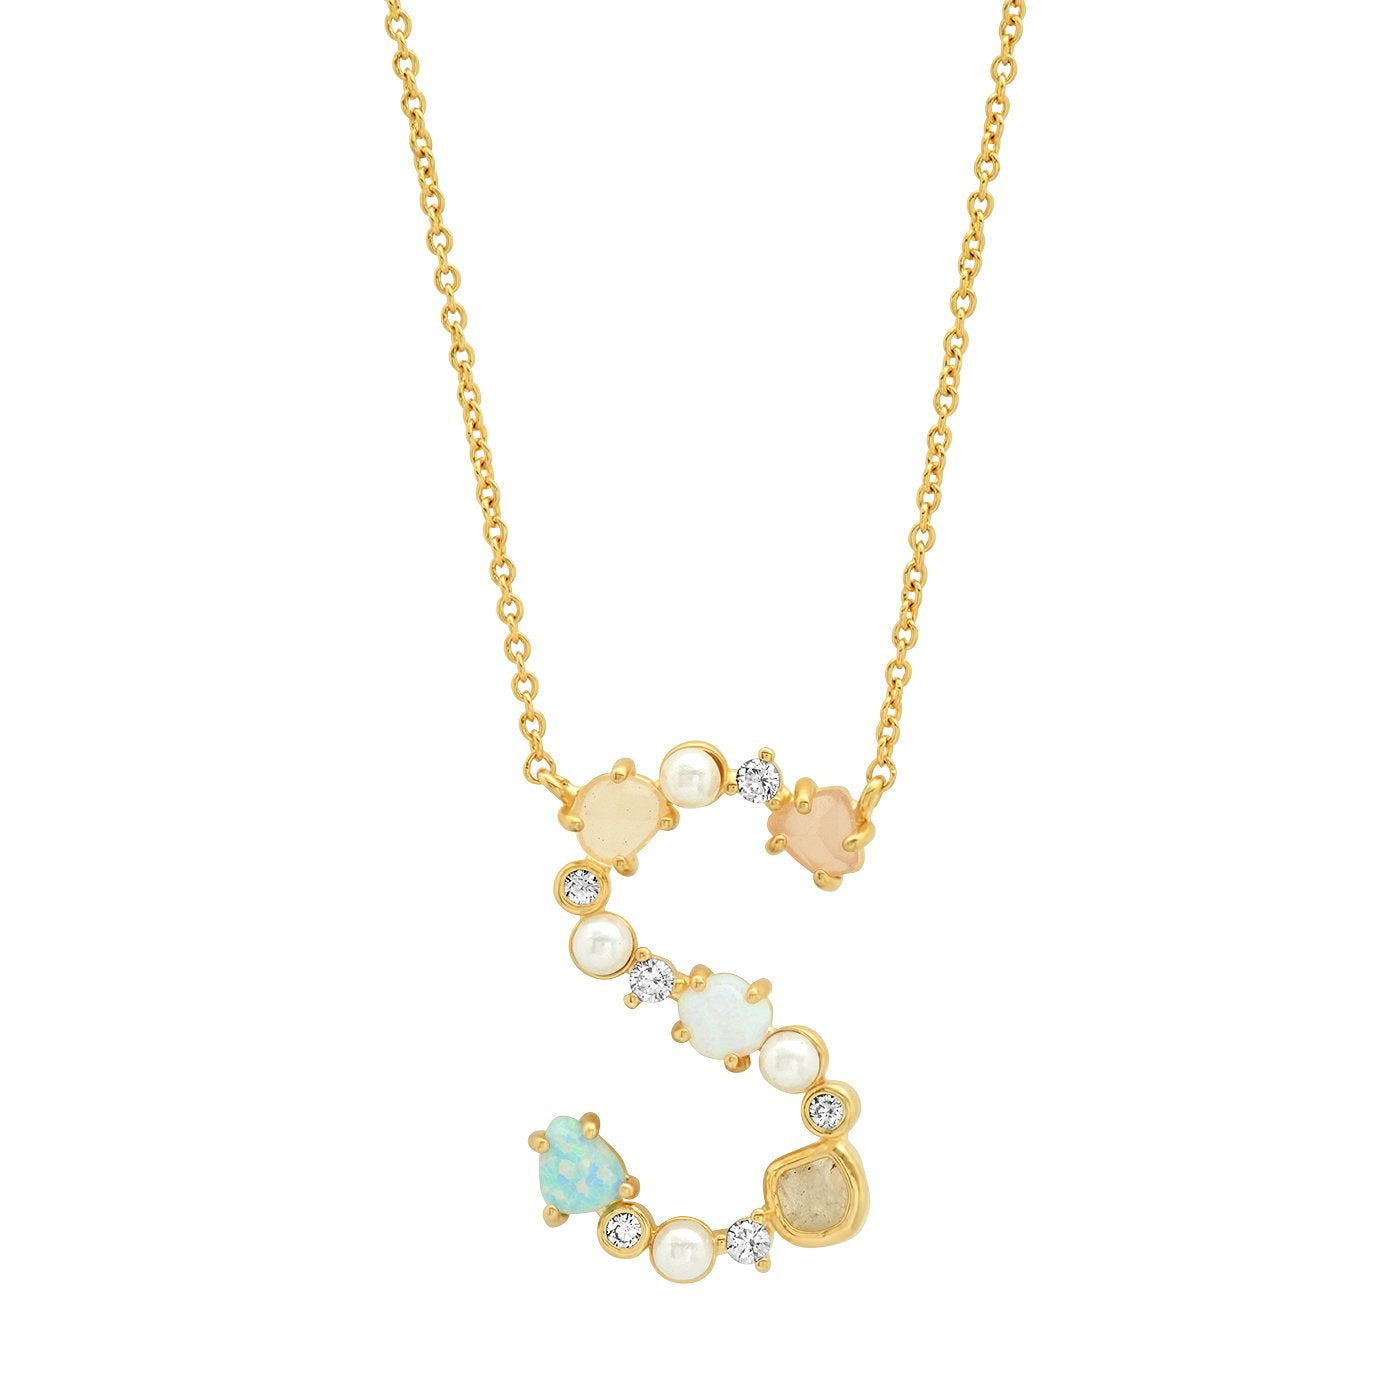 Opal Stone Initial Pendant Necklace